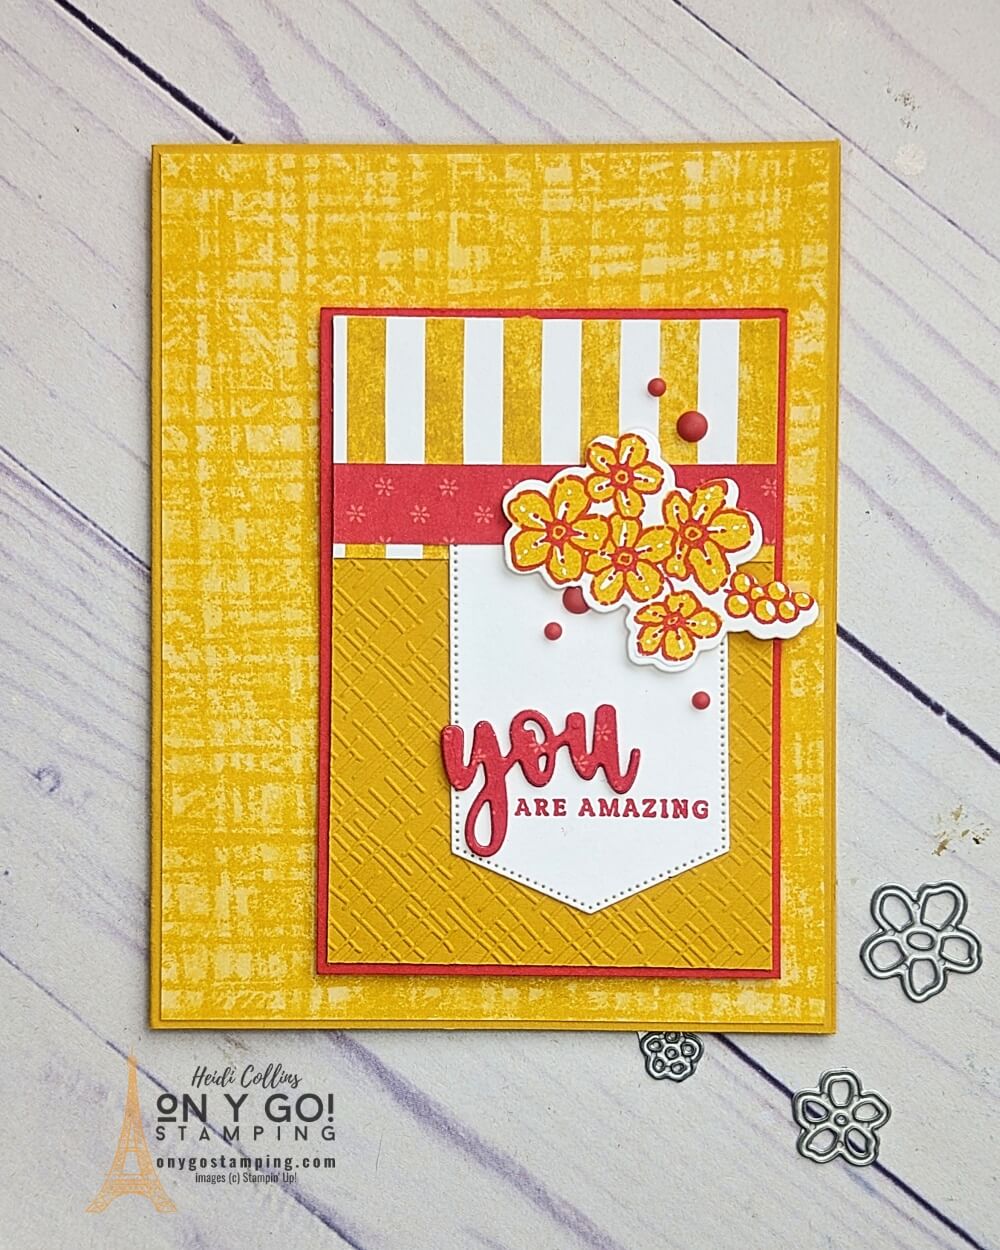 Showing your loved ones that you care is made simple with this fun and easy craft project! Create a handmade card with the beautiful Sentimental Park stamp set, Tea Boutique DSP, and Stampin' Up! With the help of this stunning combination, you can make a card that your friends and family will cherish for years to come. So grab your supplies and start crafting today!